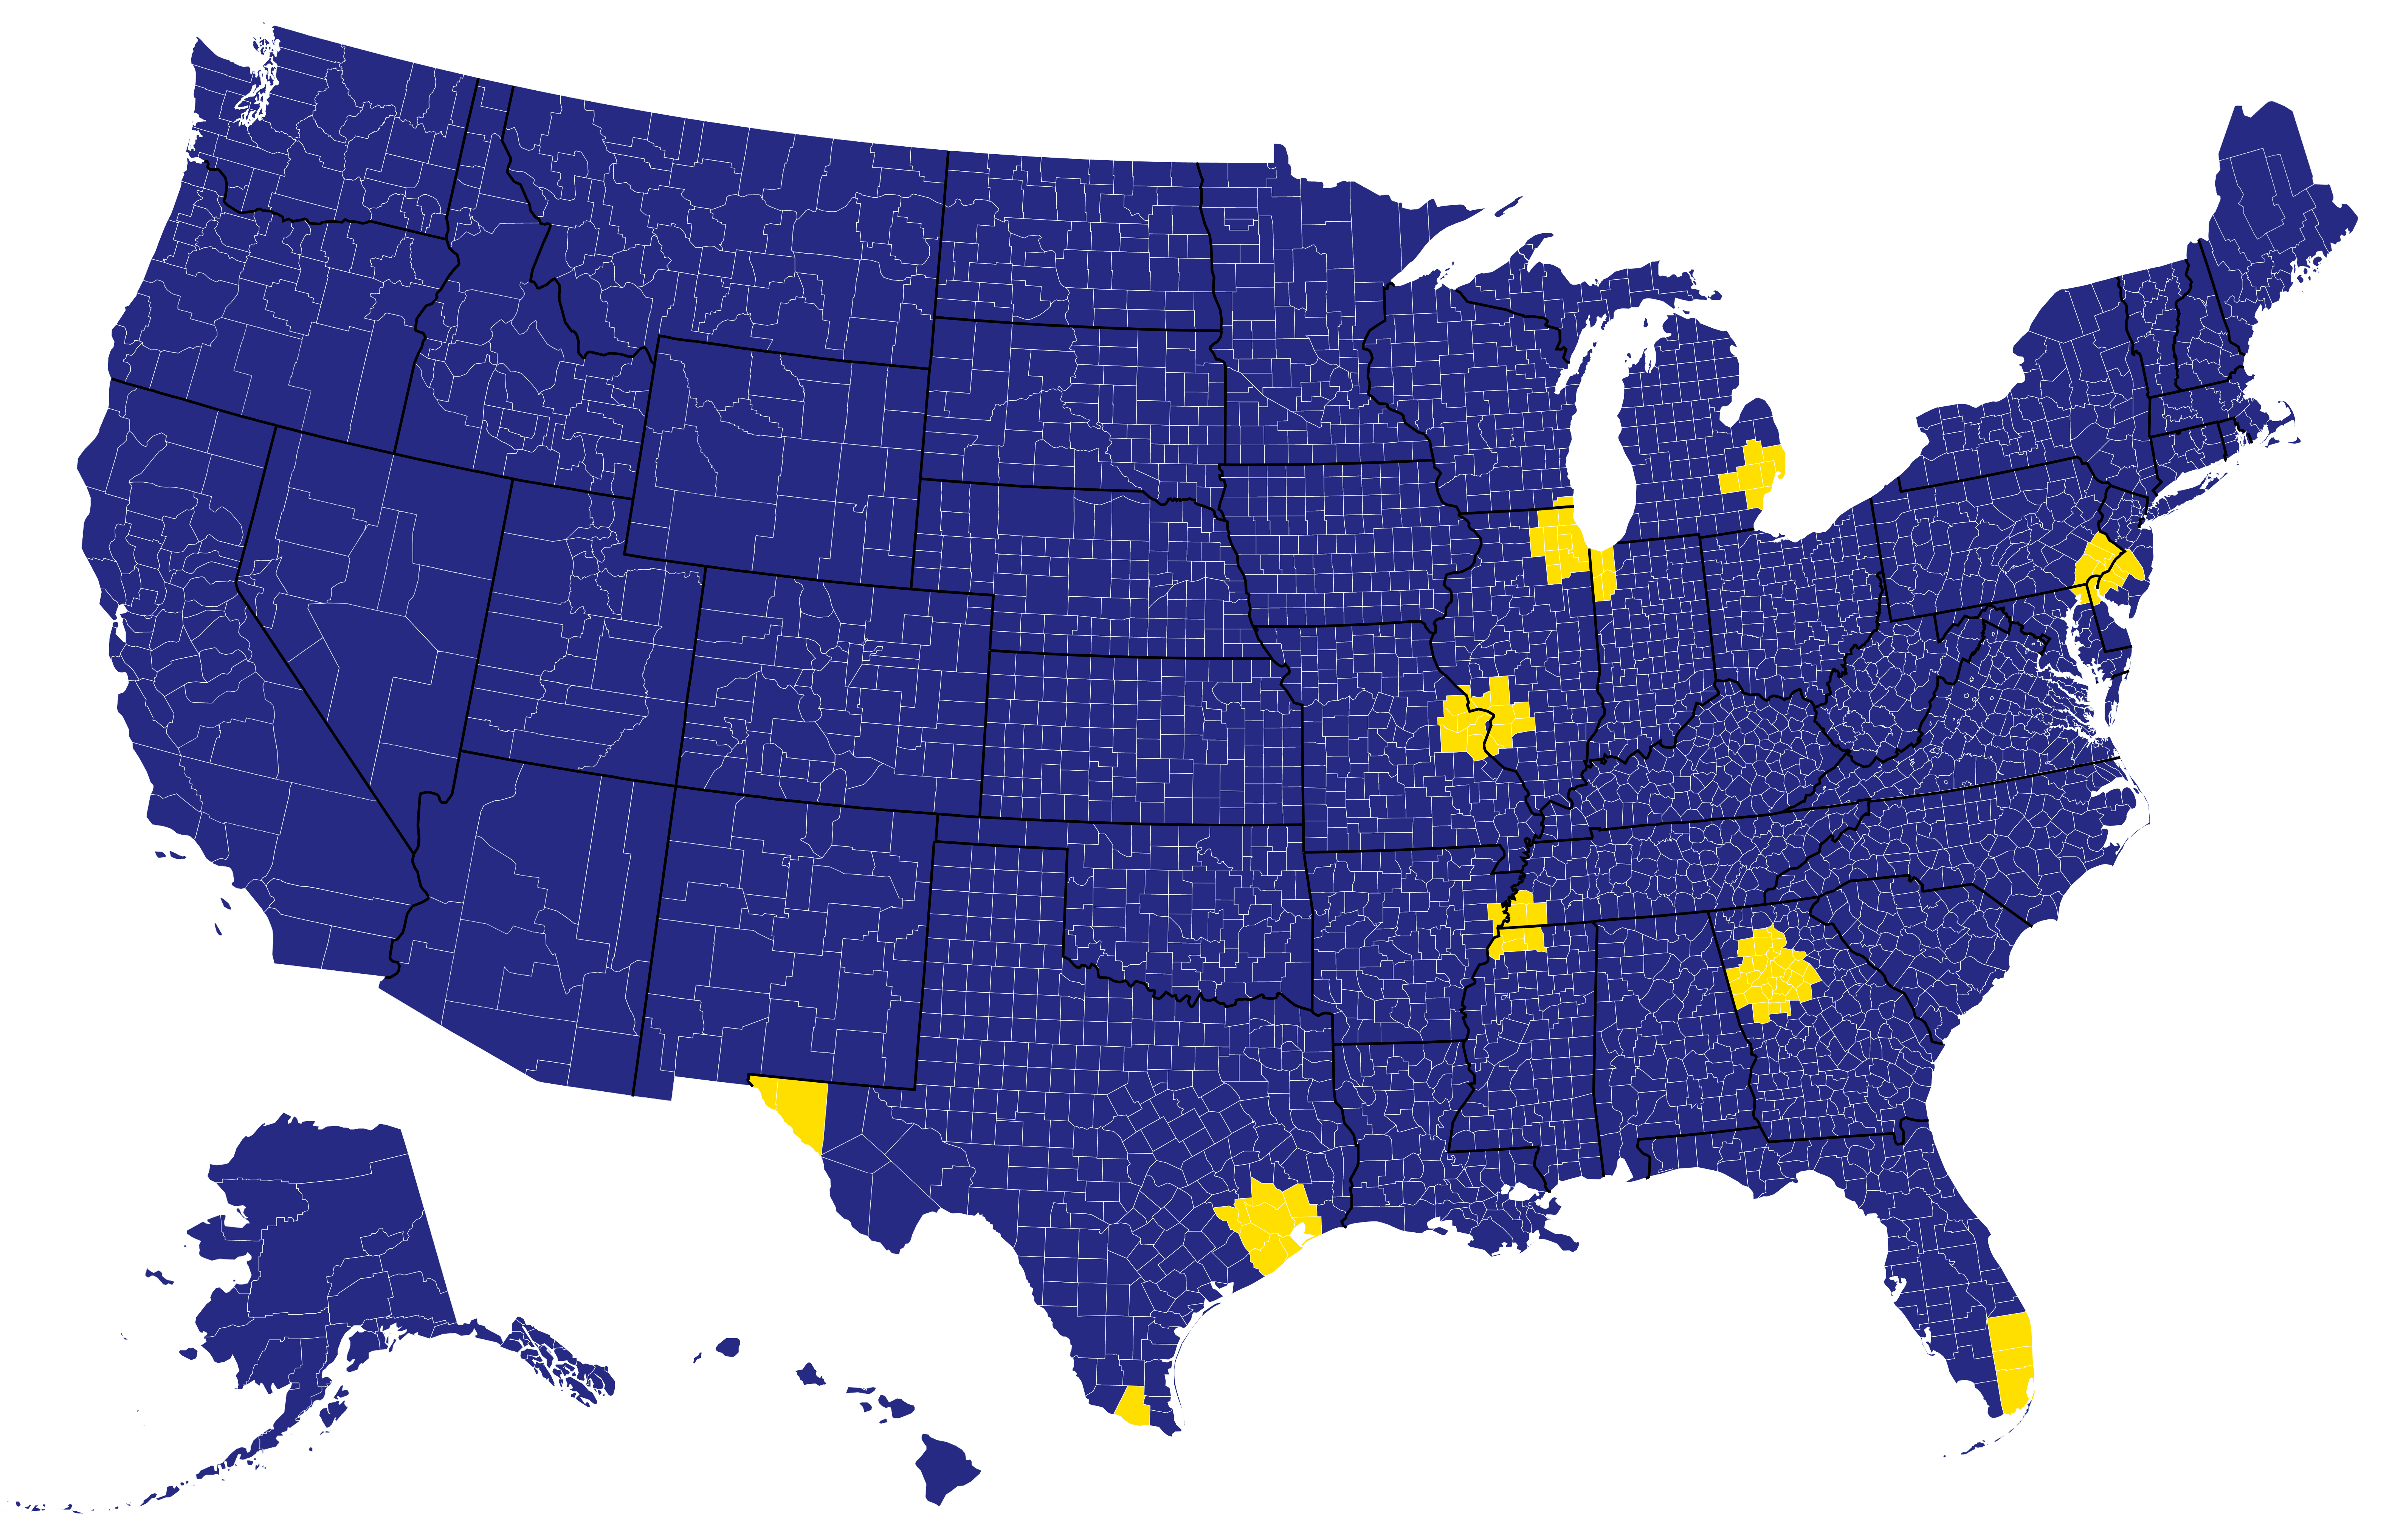 Freddie Mac BorrowSmart Access program area availability map displaying the areas listed